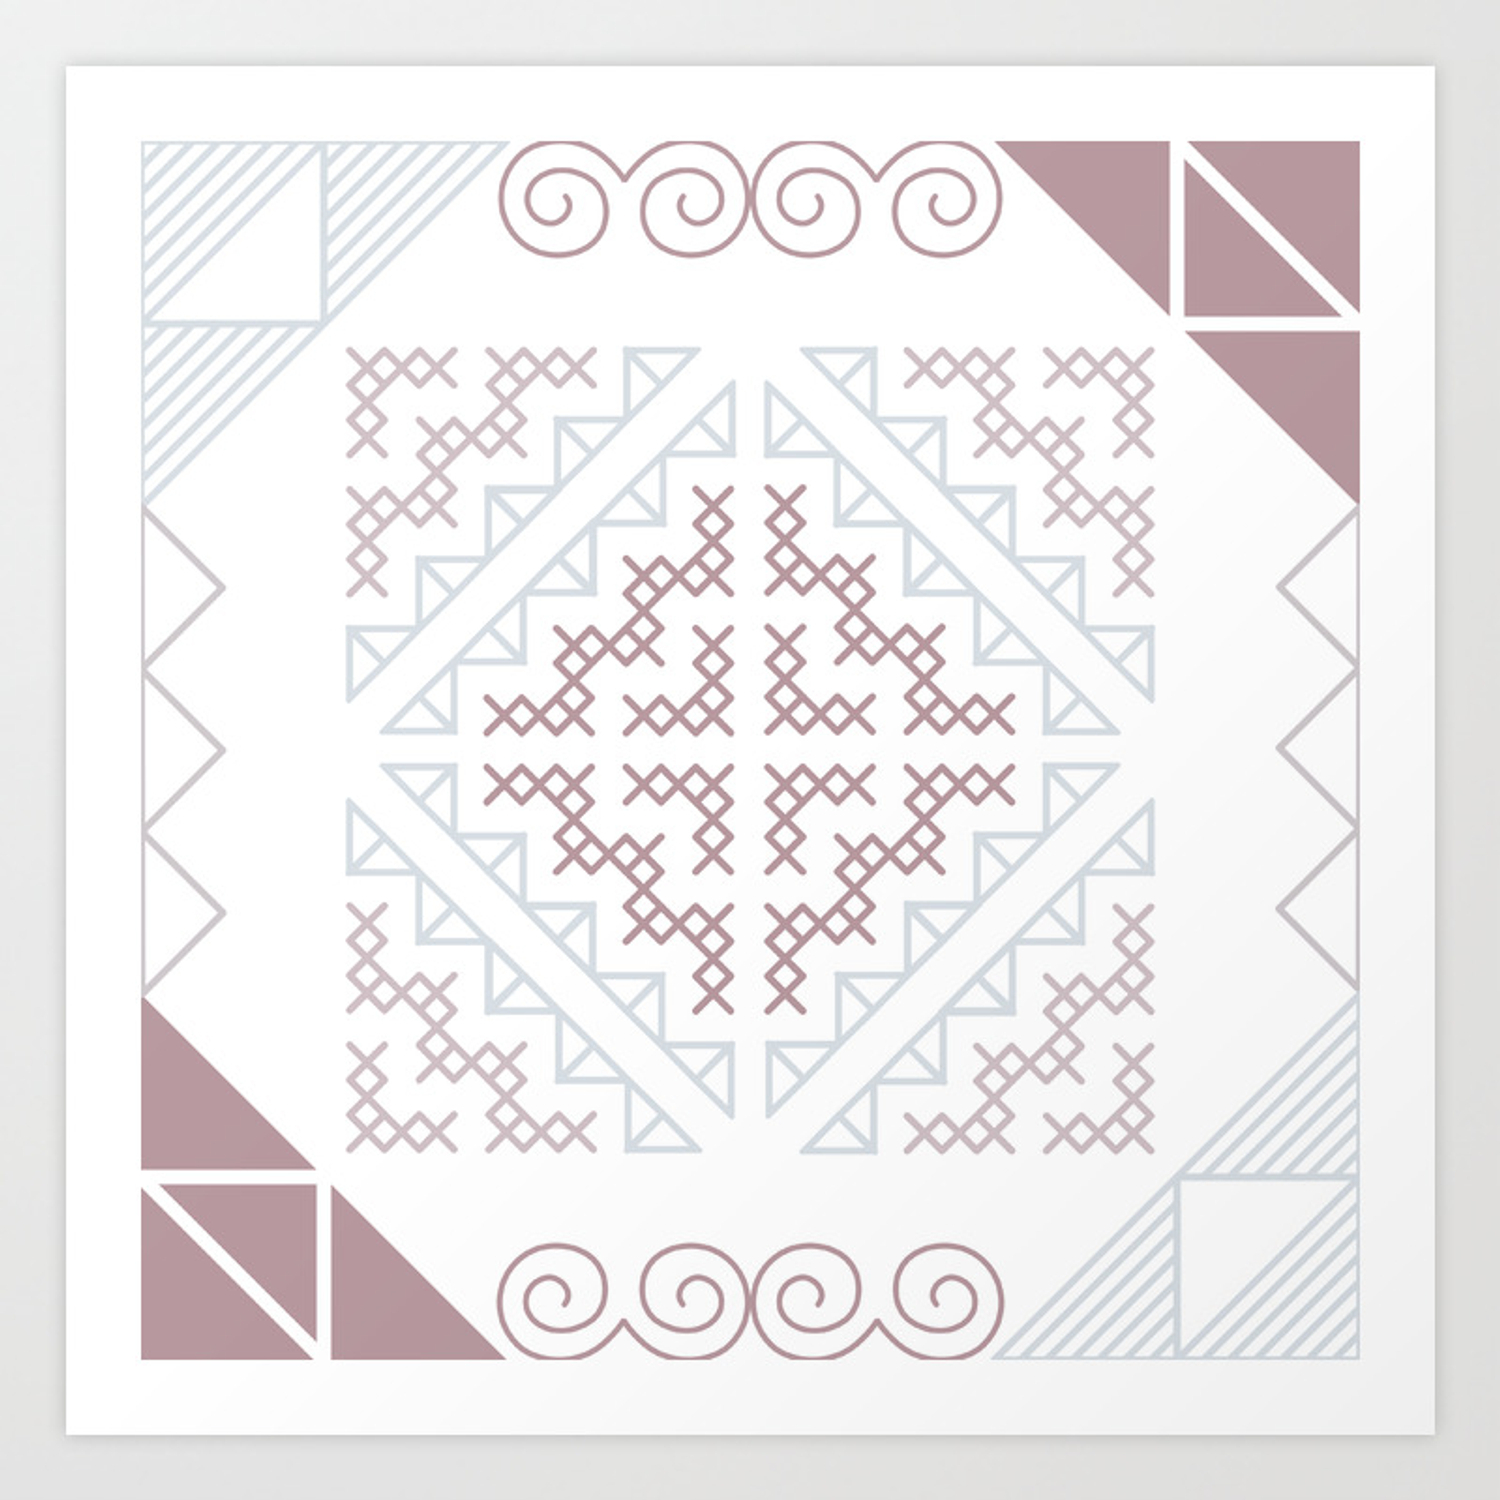 Hmong Embroidery Patterns Tribal Hmong Embroidery Art Print